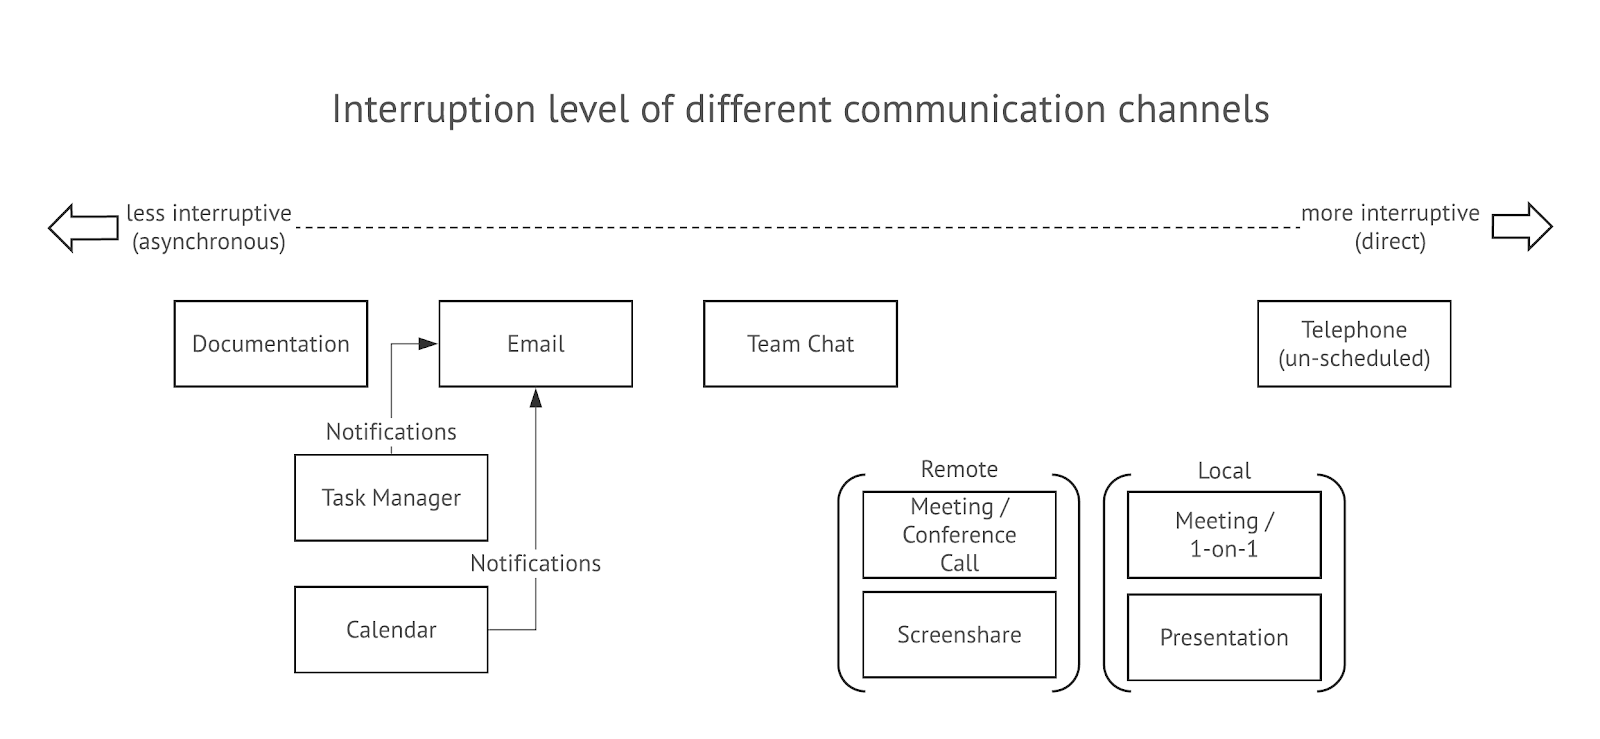 asynchronous and direct communication channels